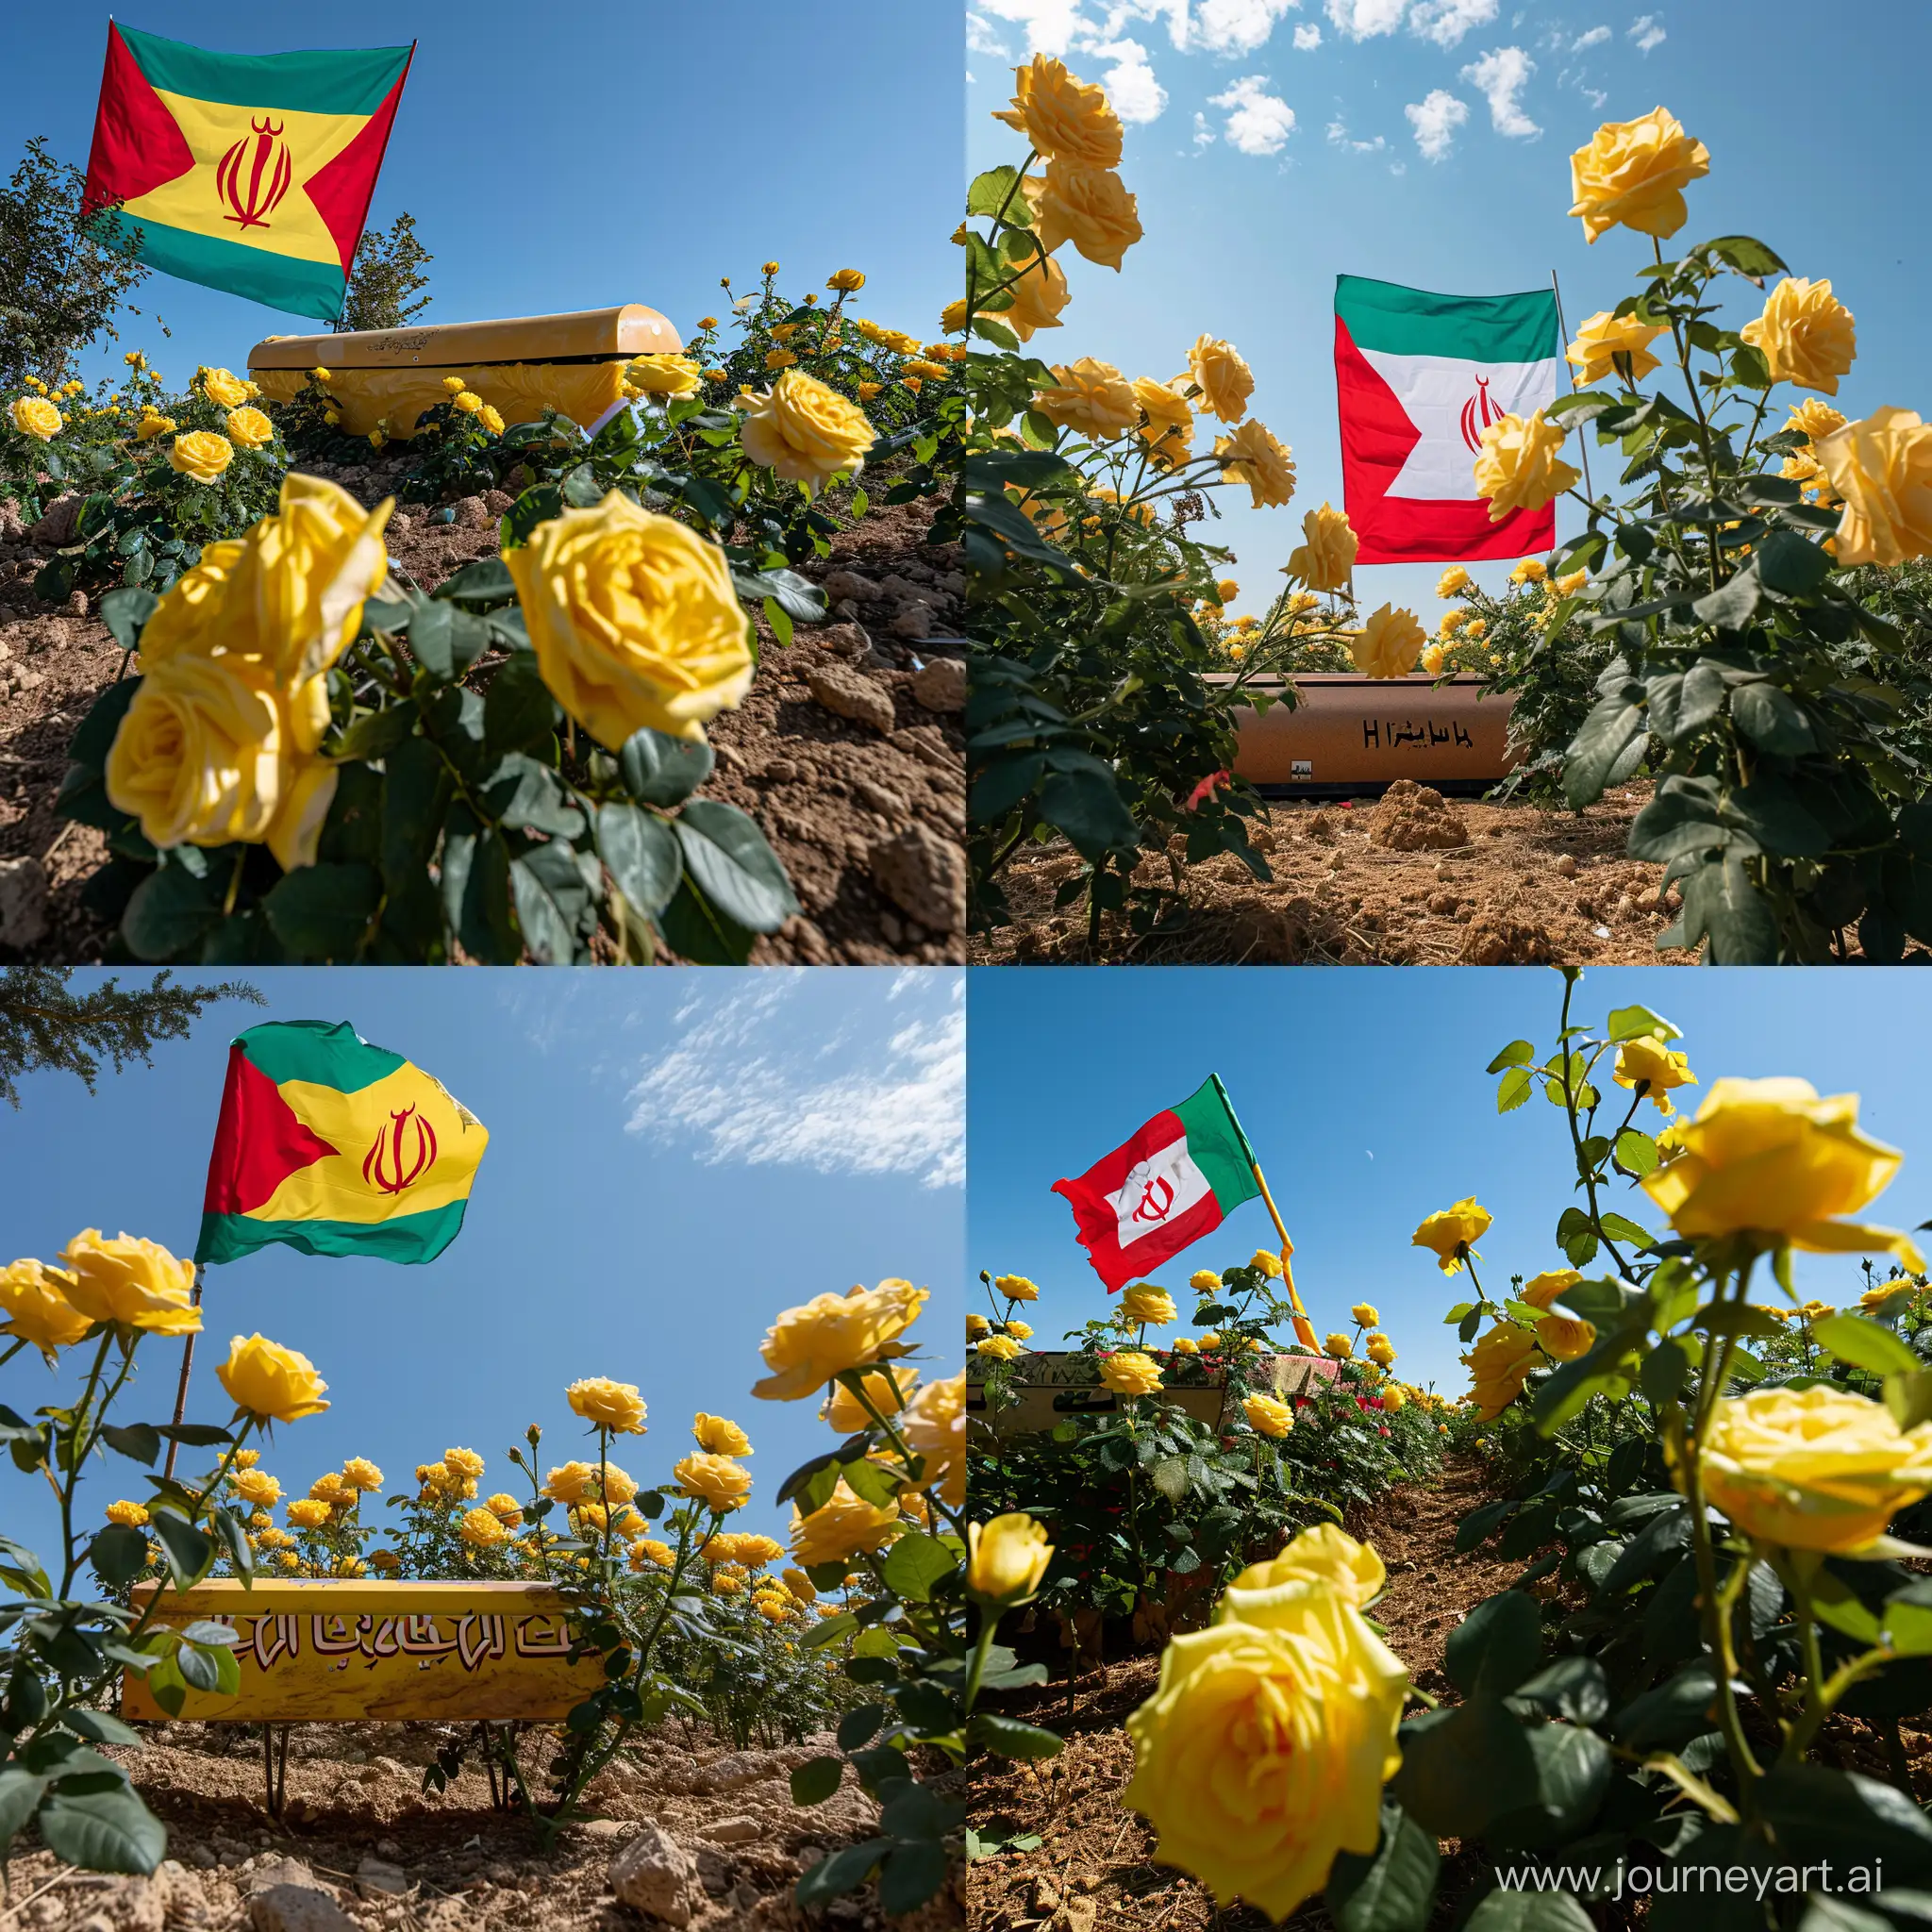 A coffin bearing the Hezbollah flag, facing toward the blue sky, is placed on the ground, surrounded by yellow roses